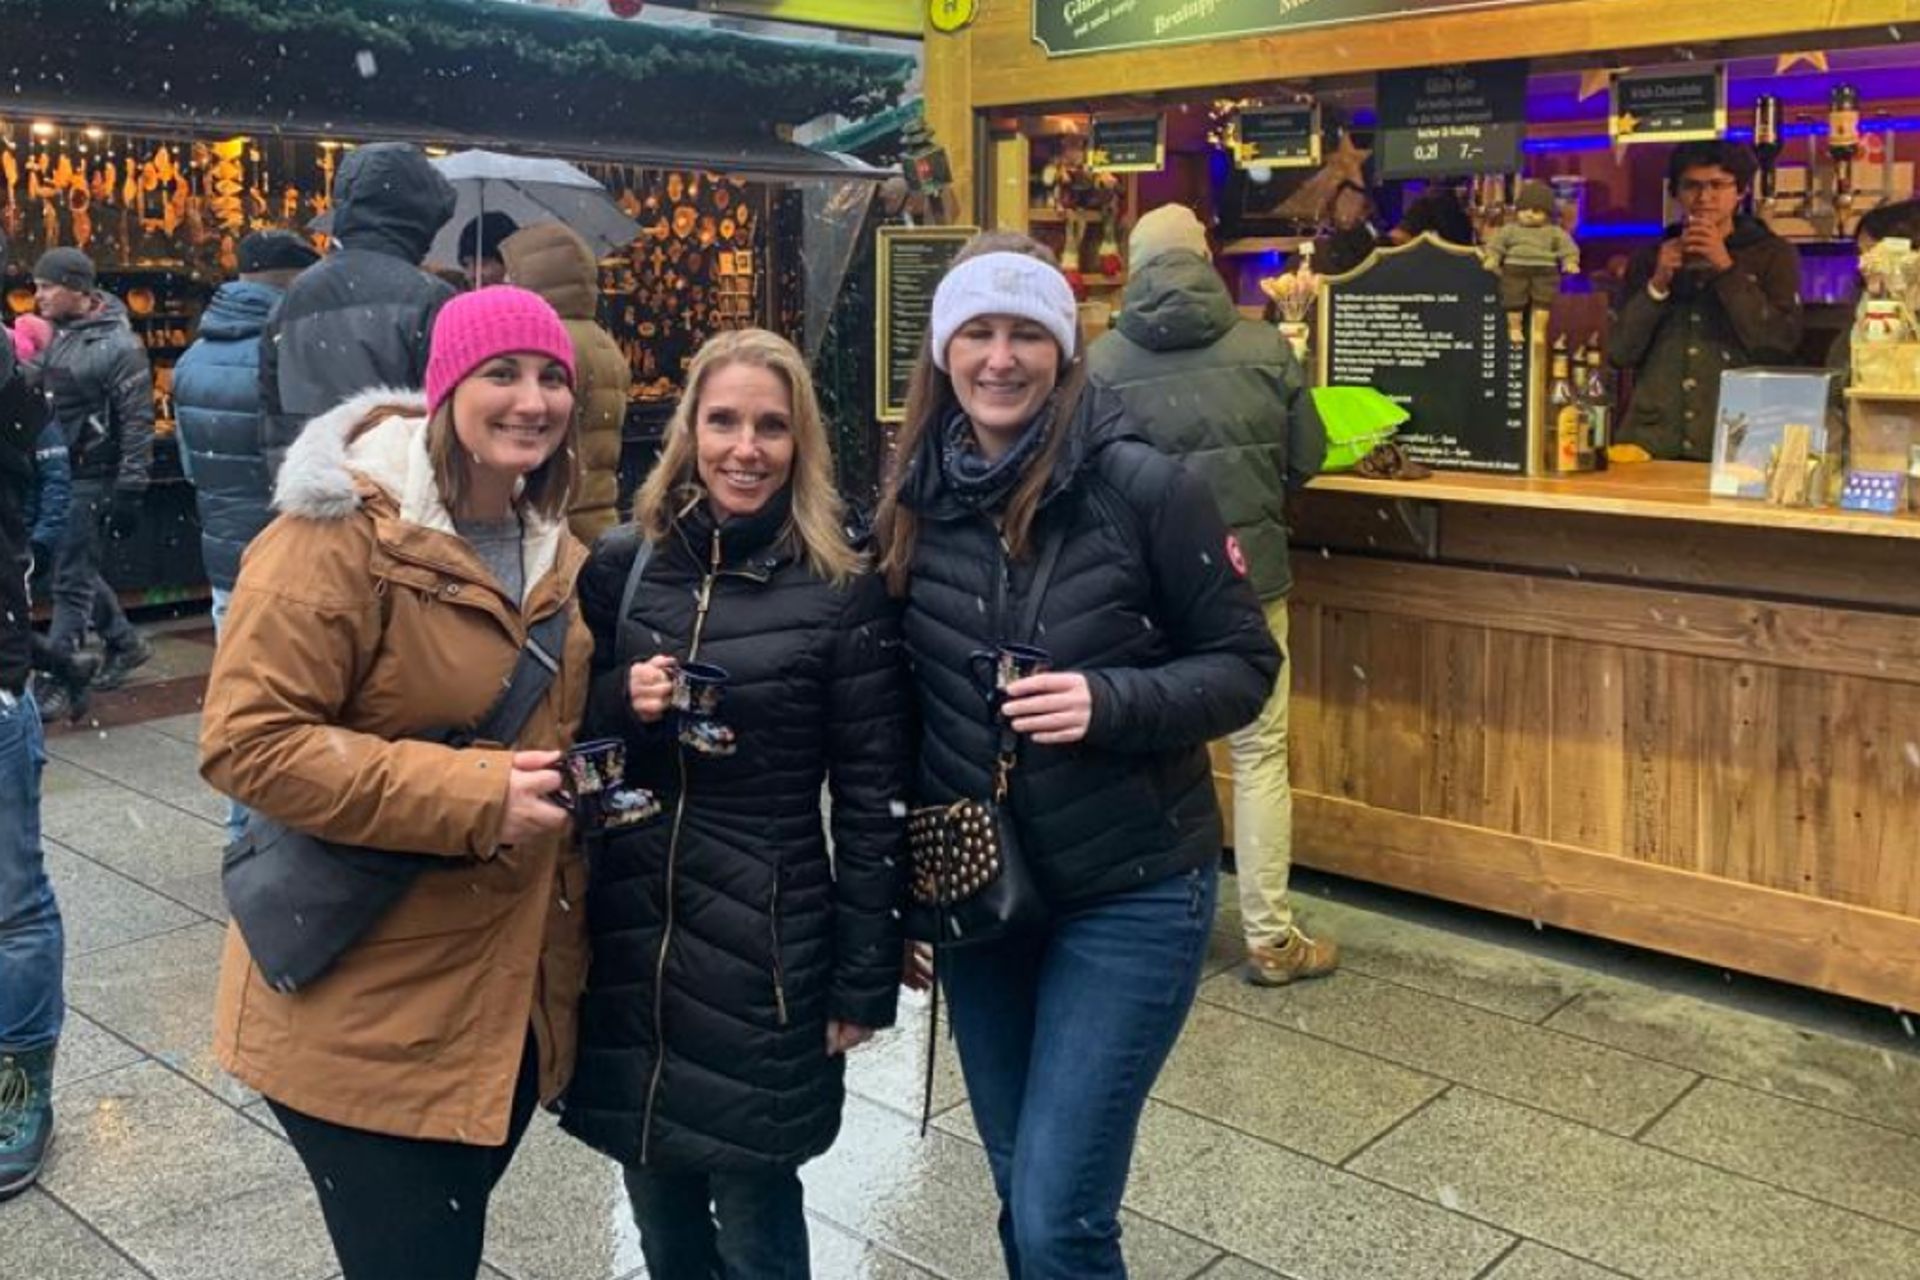 The first weekend in Munich: Darcy (center) visits the Christmas market on Marienplatz with Navistar expats Anna Reuter and Alyssa Powers.